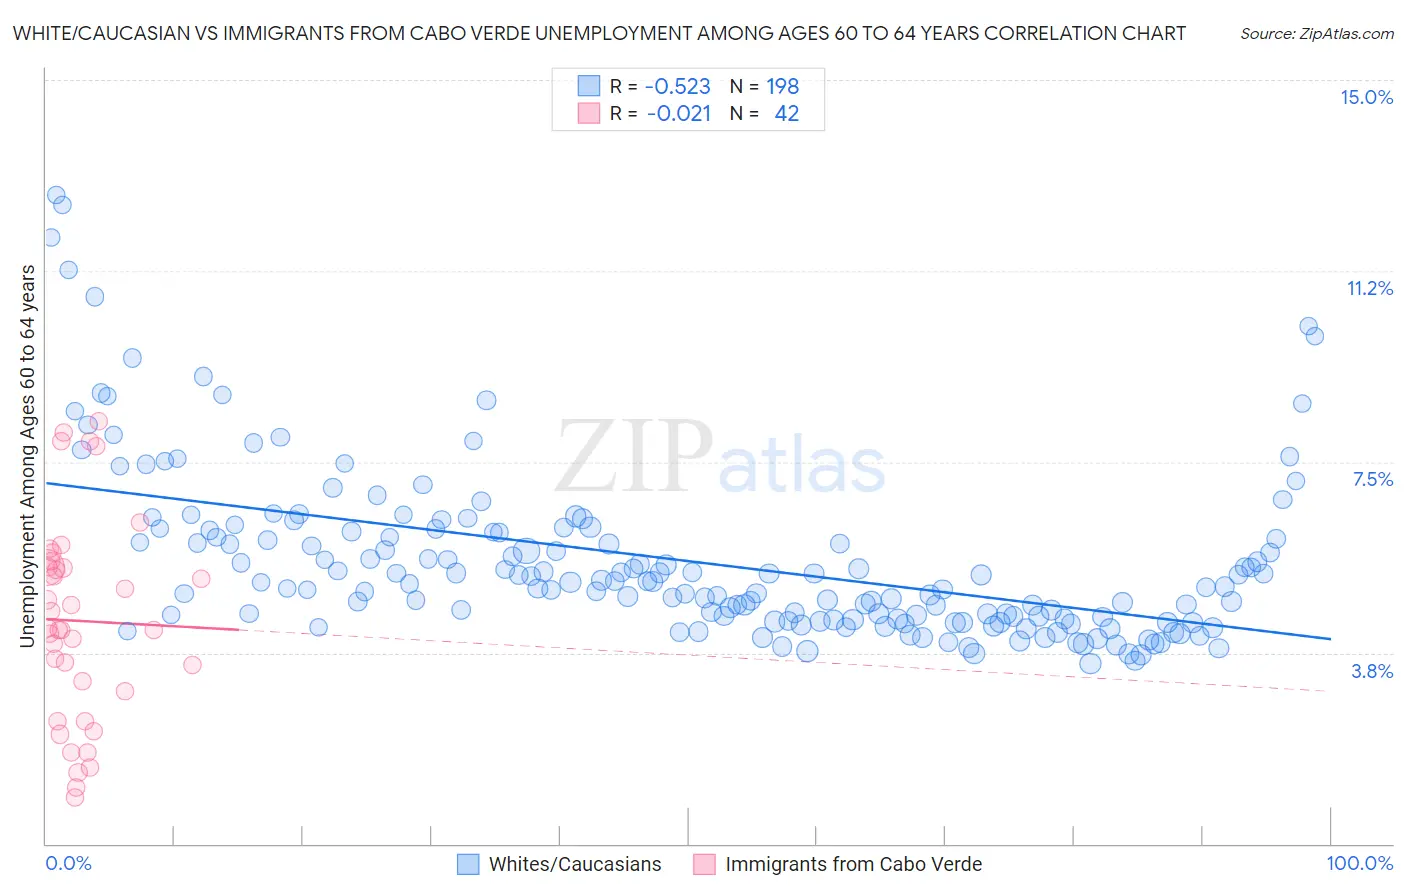 White/Caucasian vs Immigrants from Cabo Verde Unemployment Among Ages 60 to 64 years